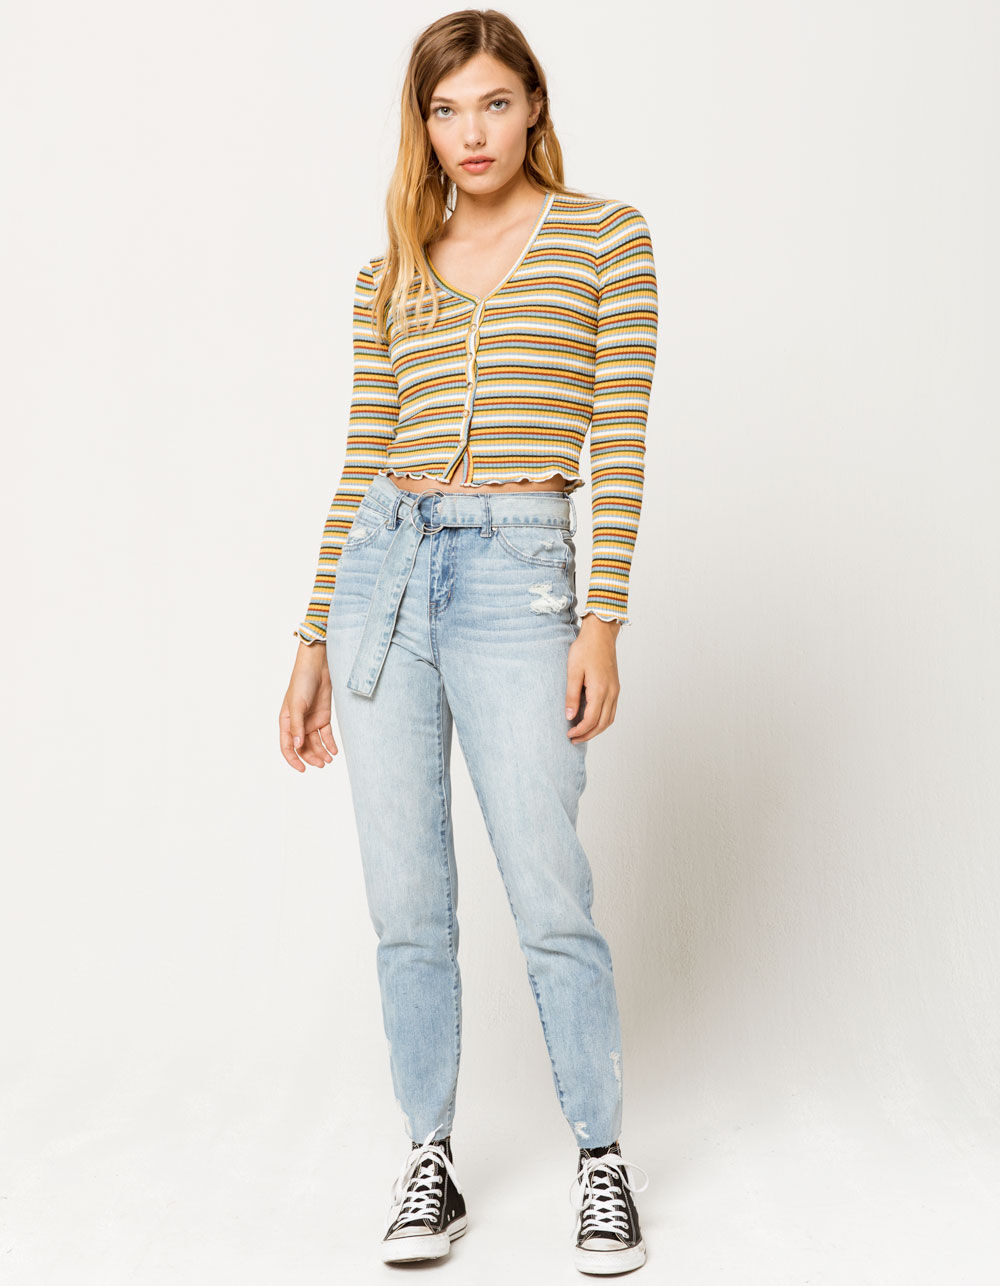 SKY AND SPARROW Stripe Womens Knit Top